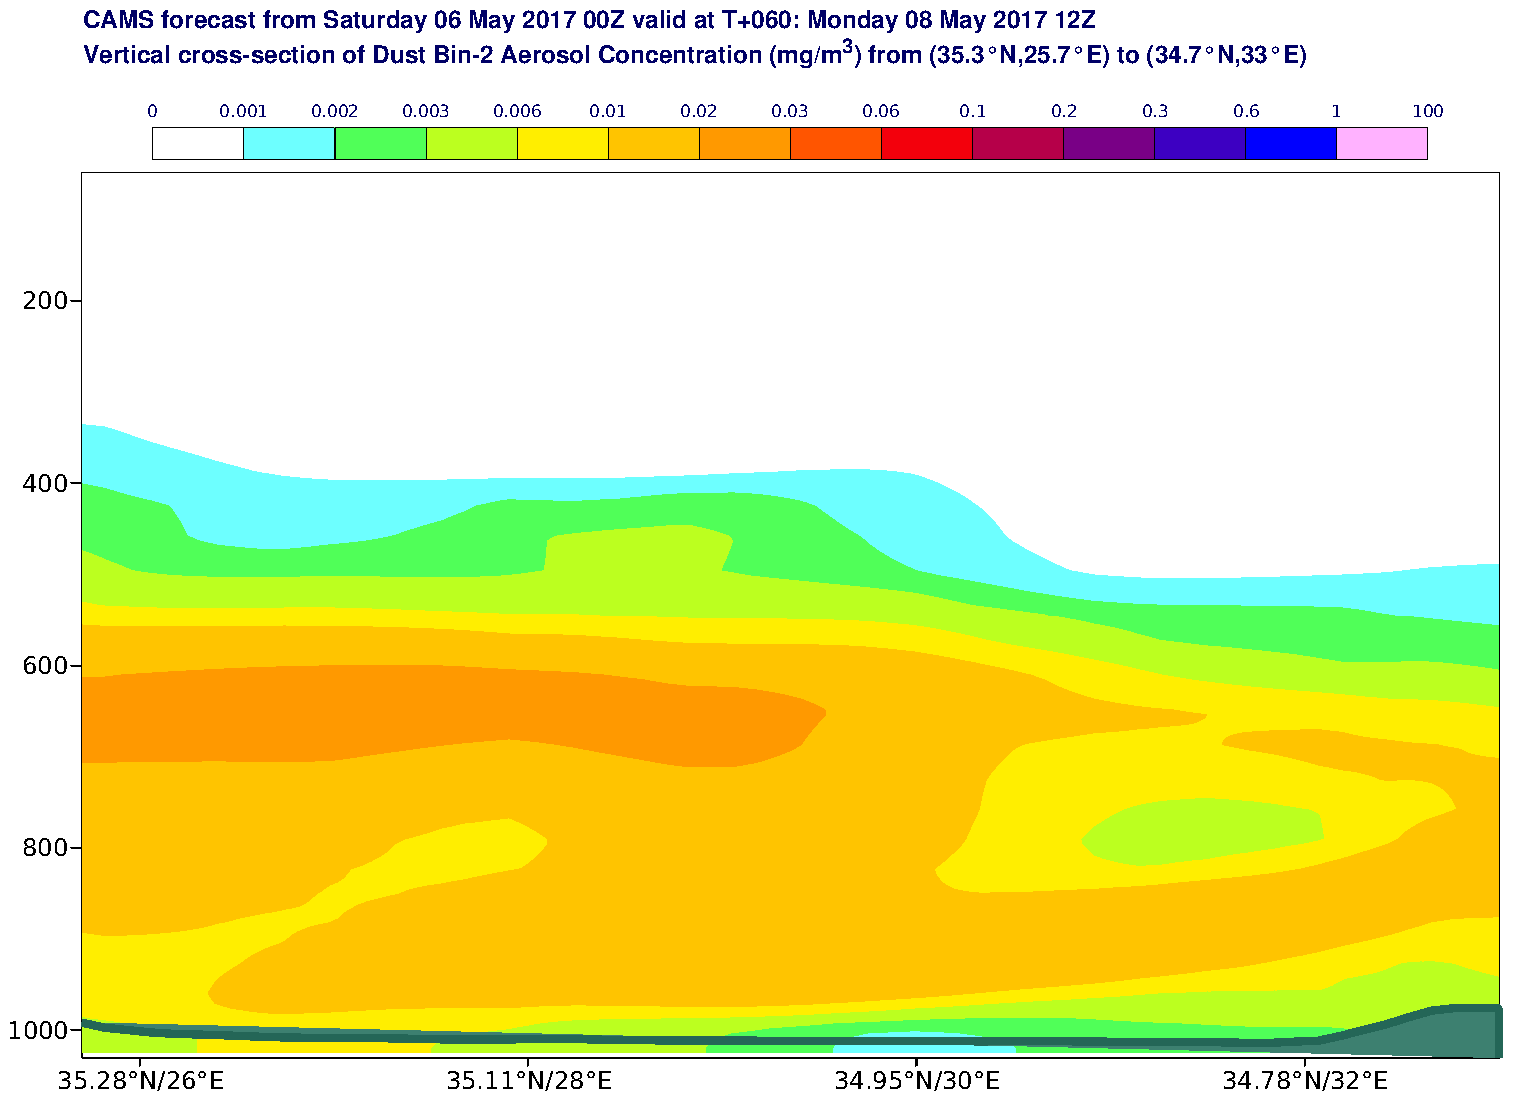 Vertical cross-section of Dust Bin-2 Aerosol Concentration (mg/m3) valid at T60 - 2017-05-08 12:00